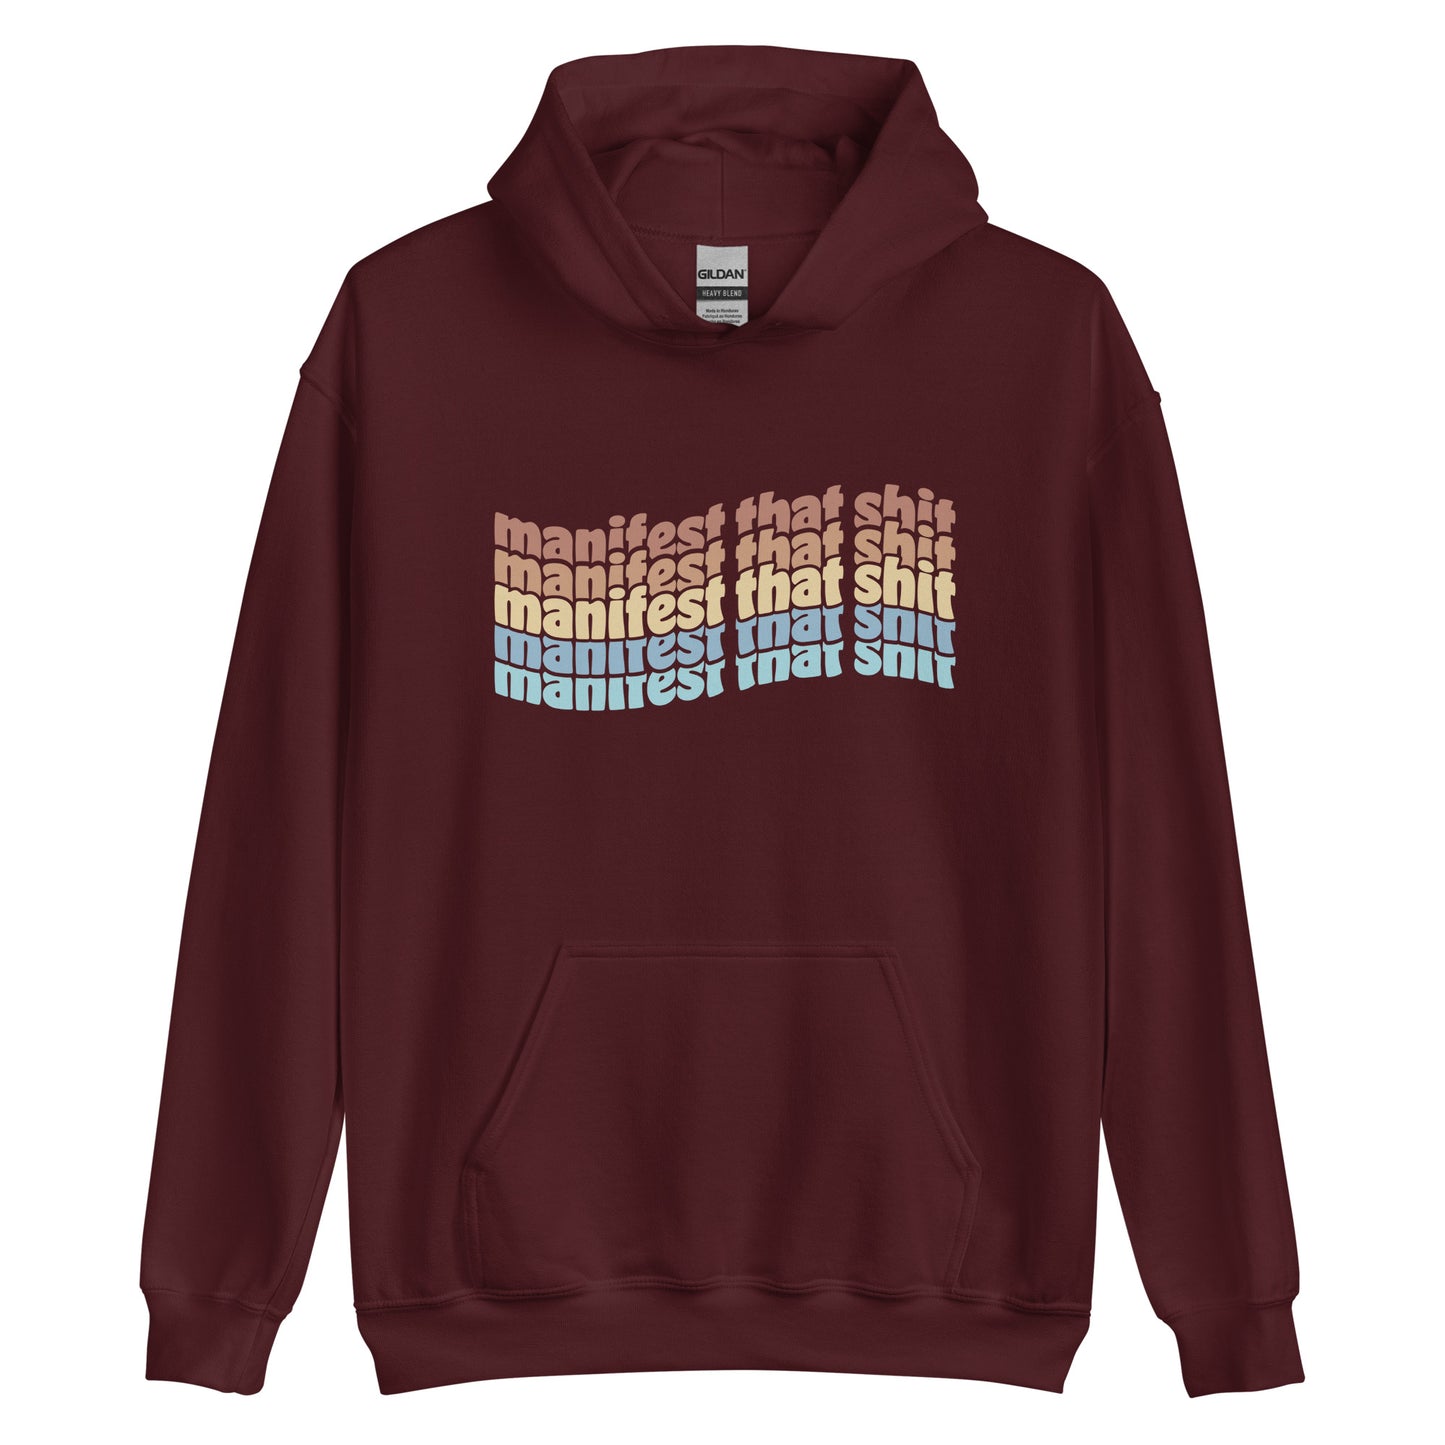 A maroon hooded sweatshirt featuring stacked text that reads "manifest that shit" in a rainbow of colors.